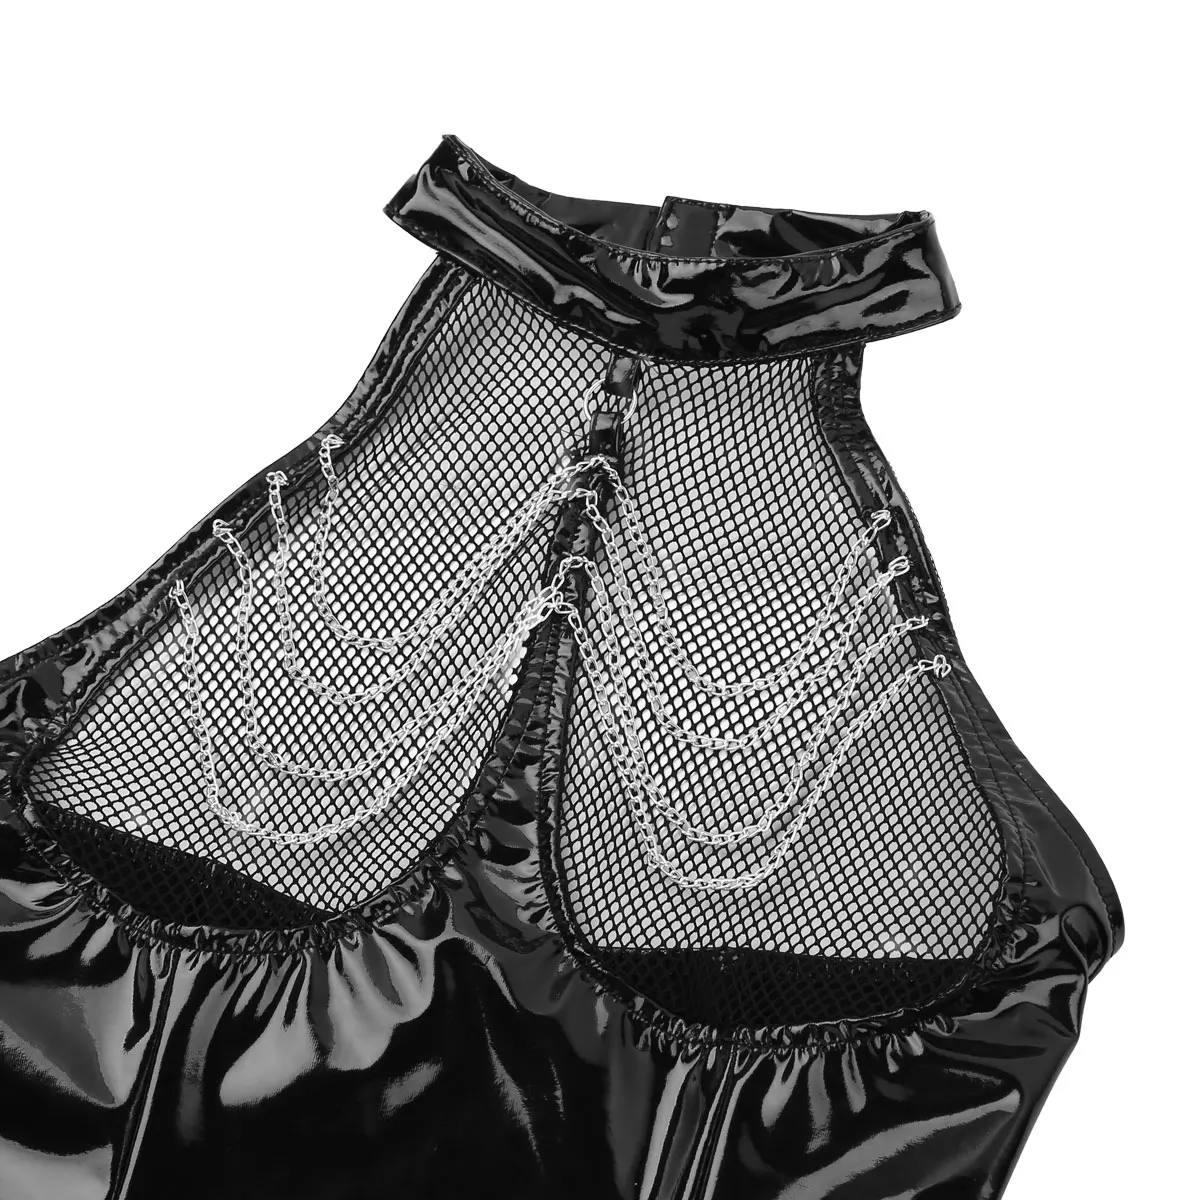 

Women Lingerie Fishnet Bodysuit Wet Look Patent Leather Halter Neck Backless See Through Bust Bustier Corset Top with Suspenders